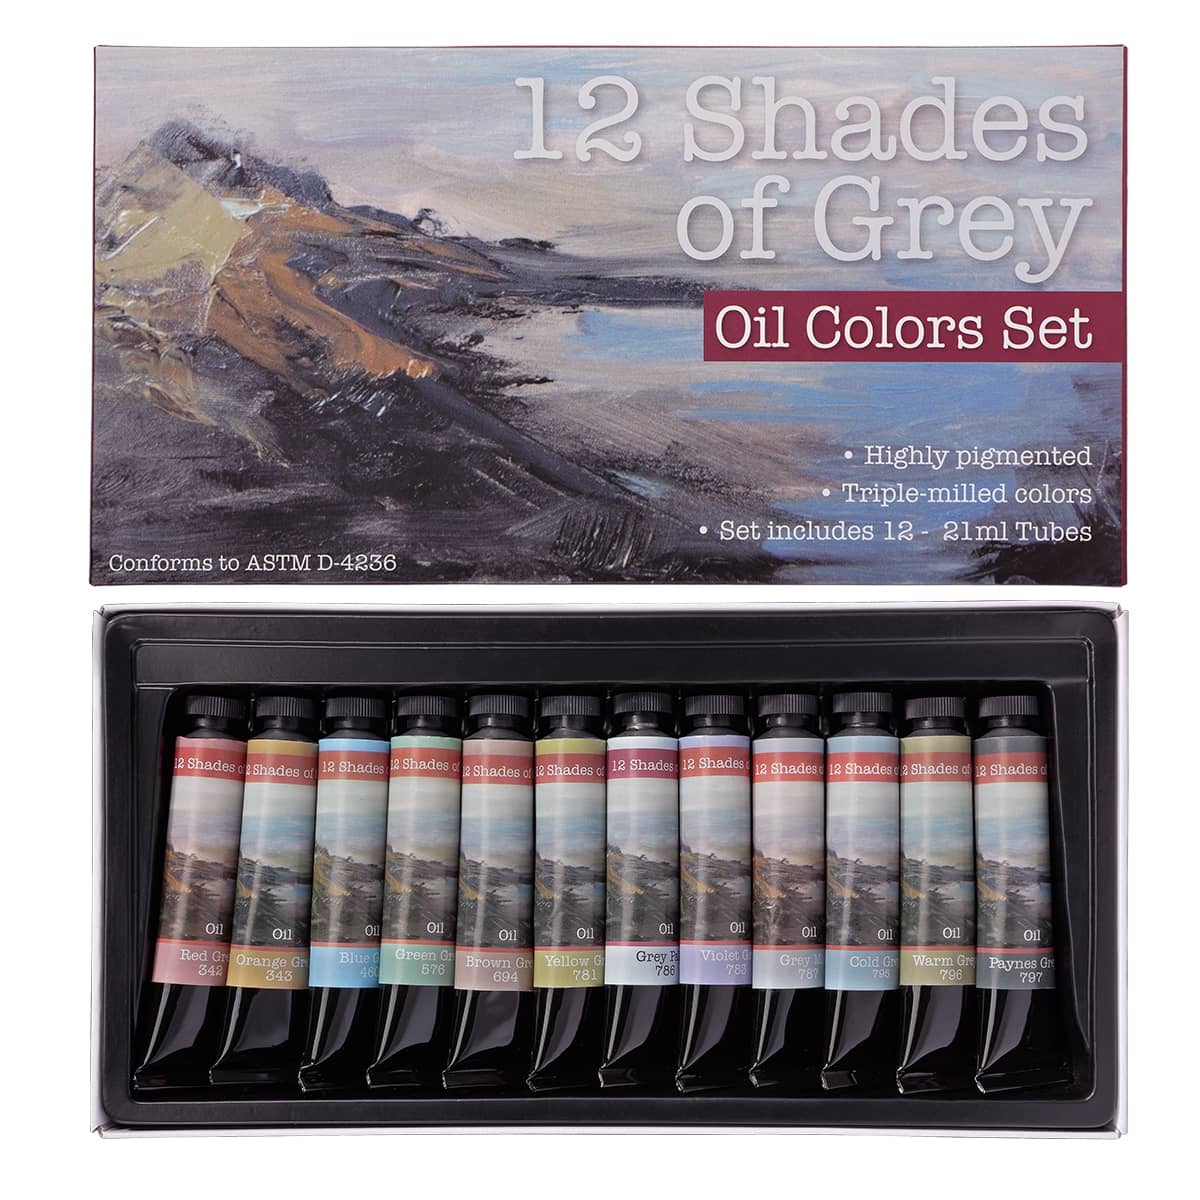 12 Shades of Grey Oil Colors Set of 12, 21ml Tubes